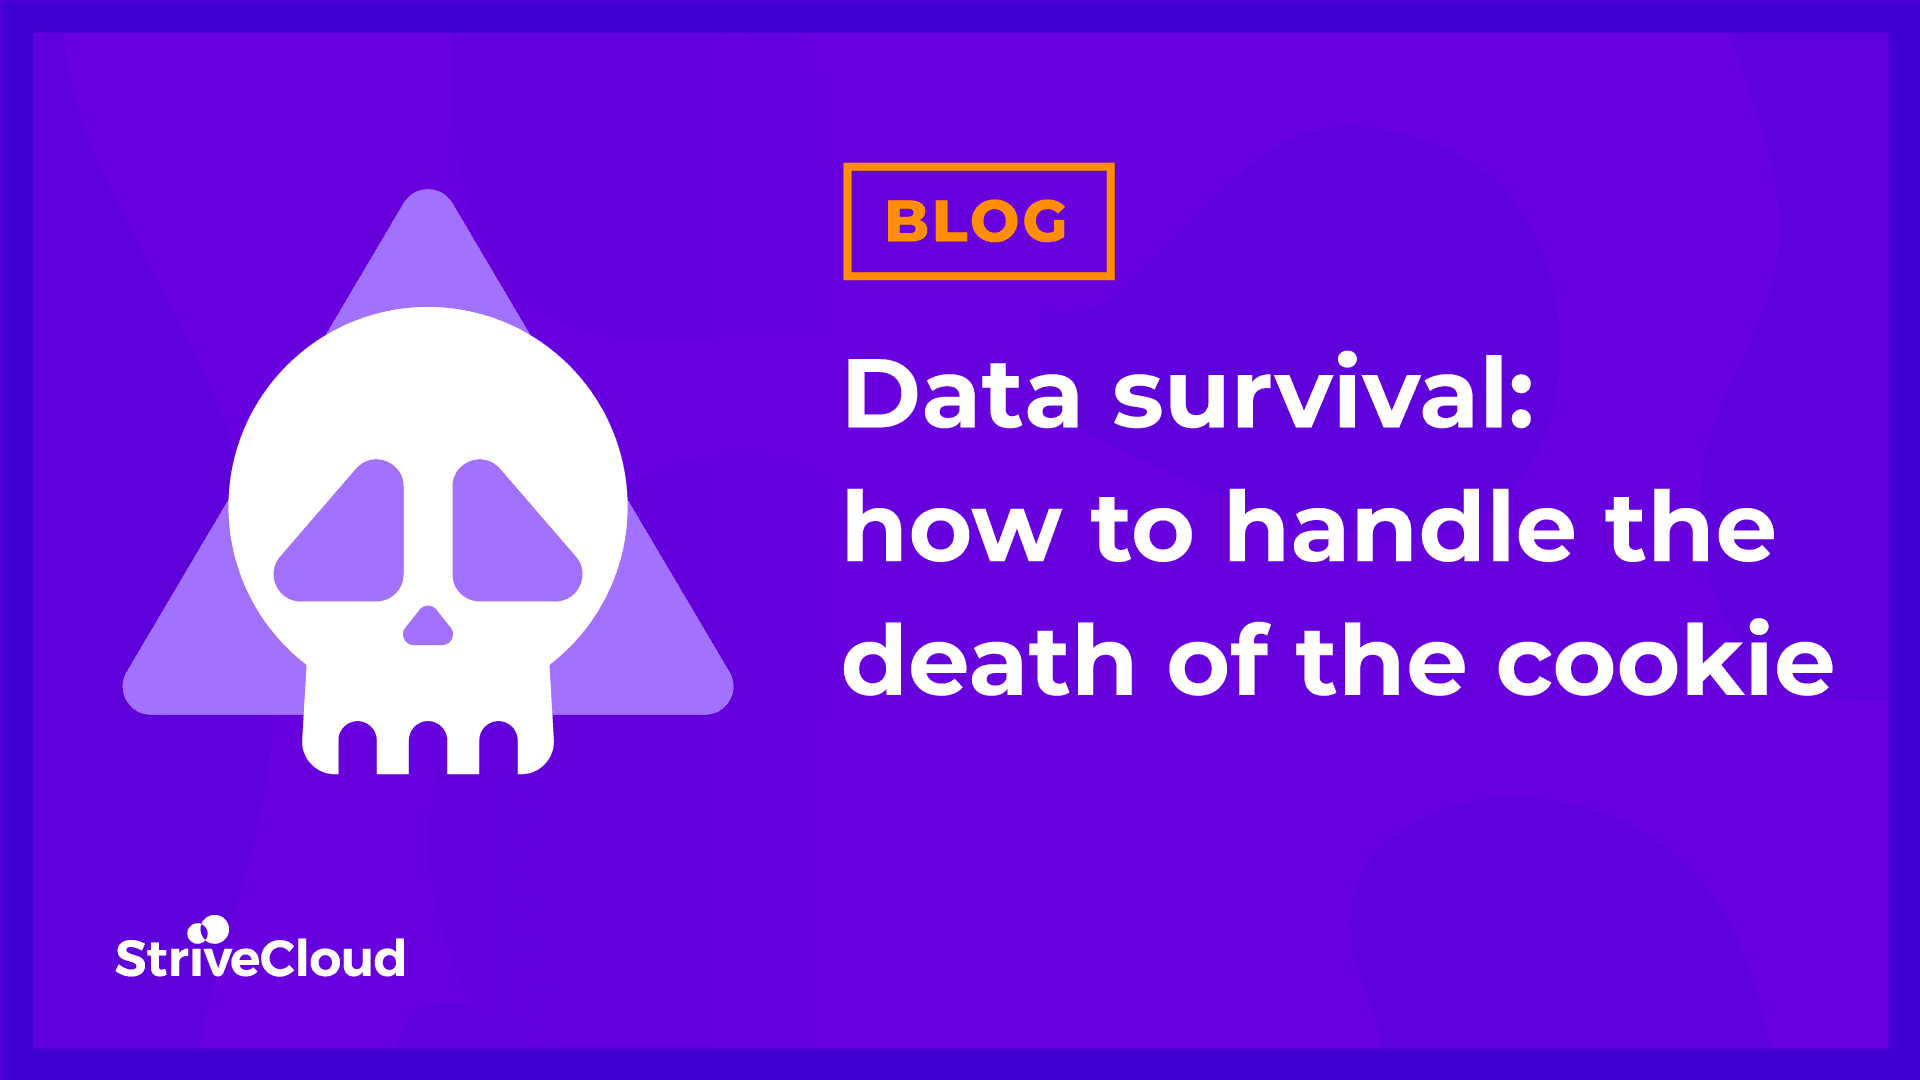 Data survival: how to handle the death of the cookie